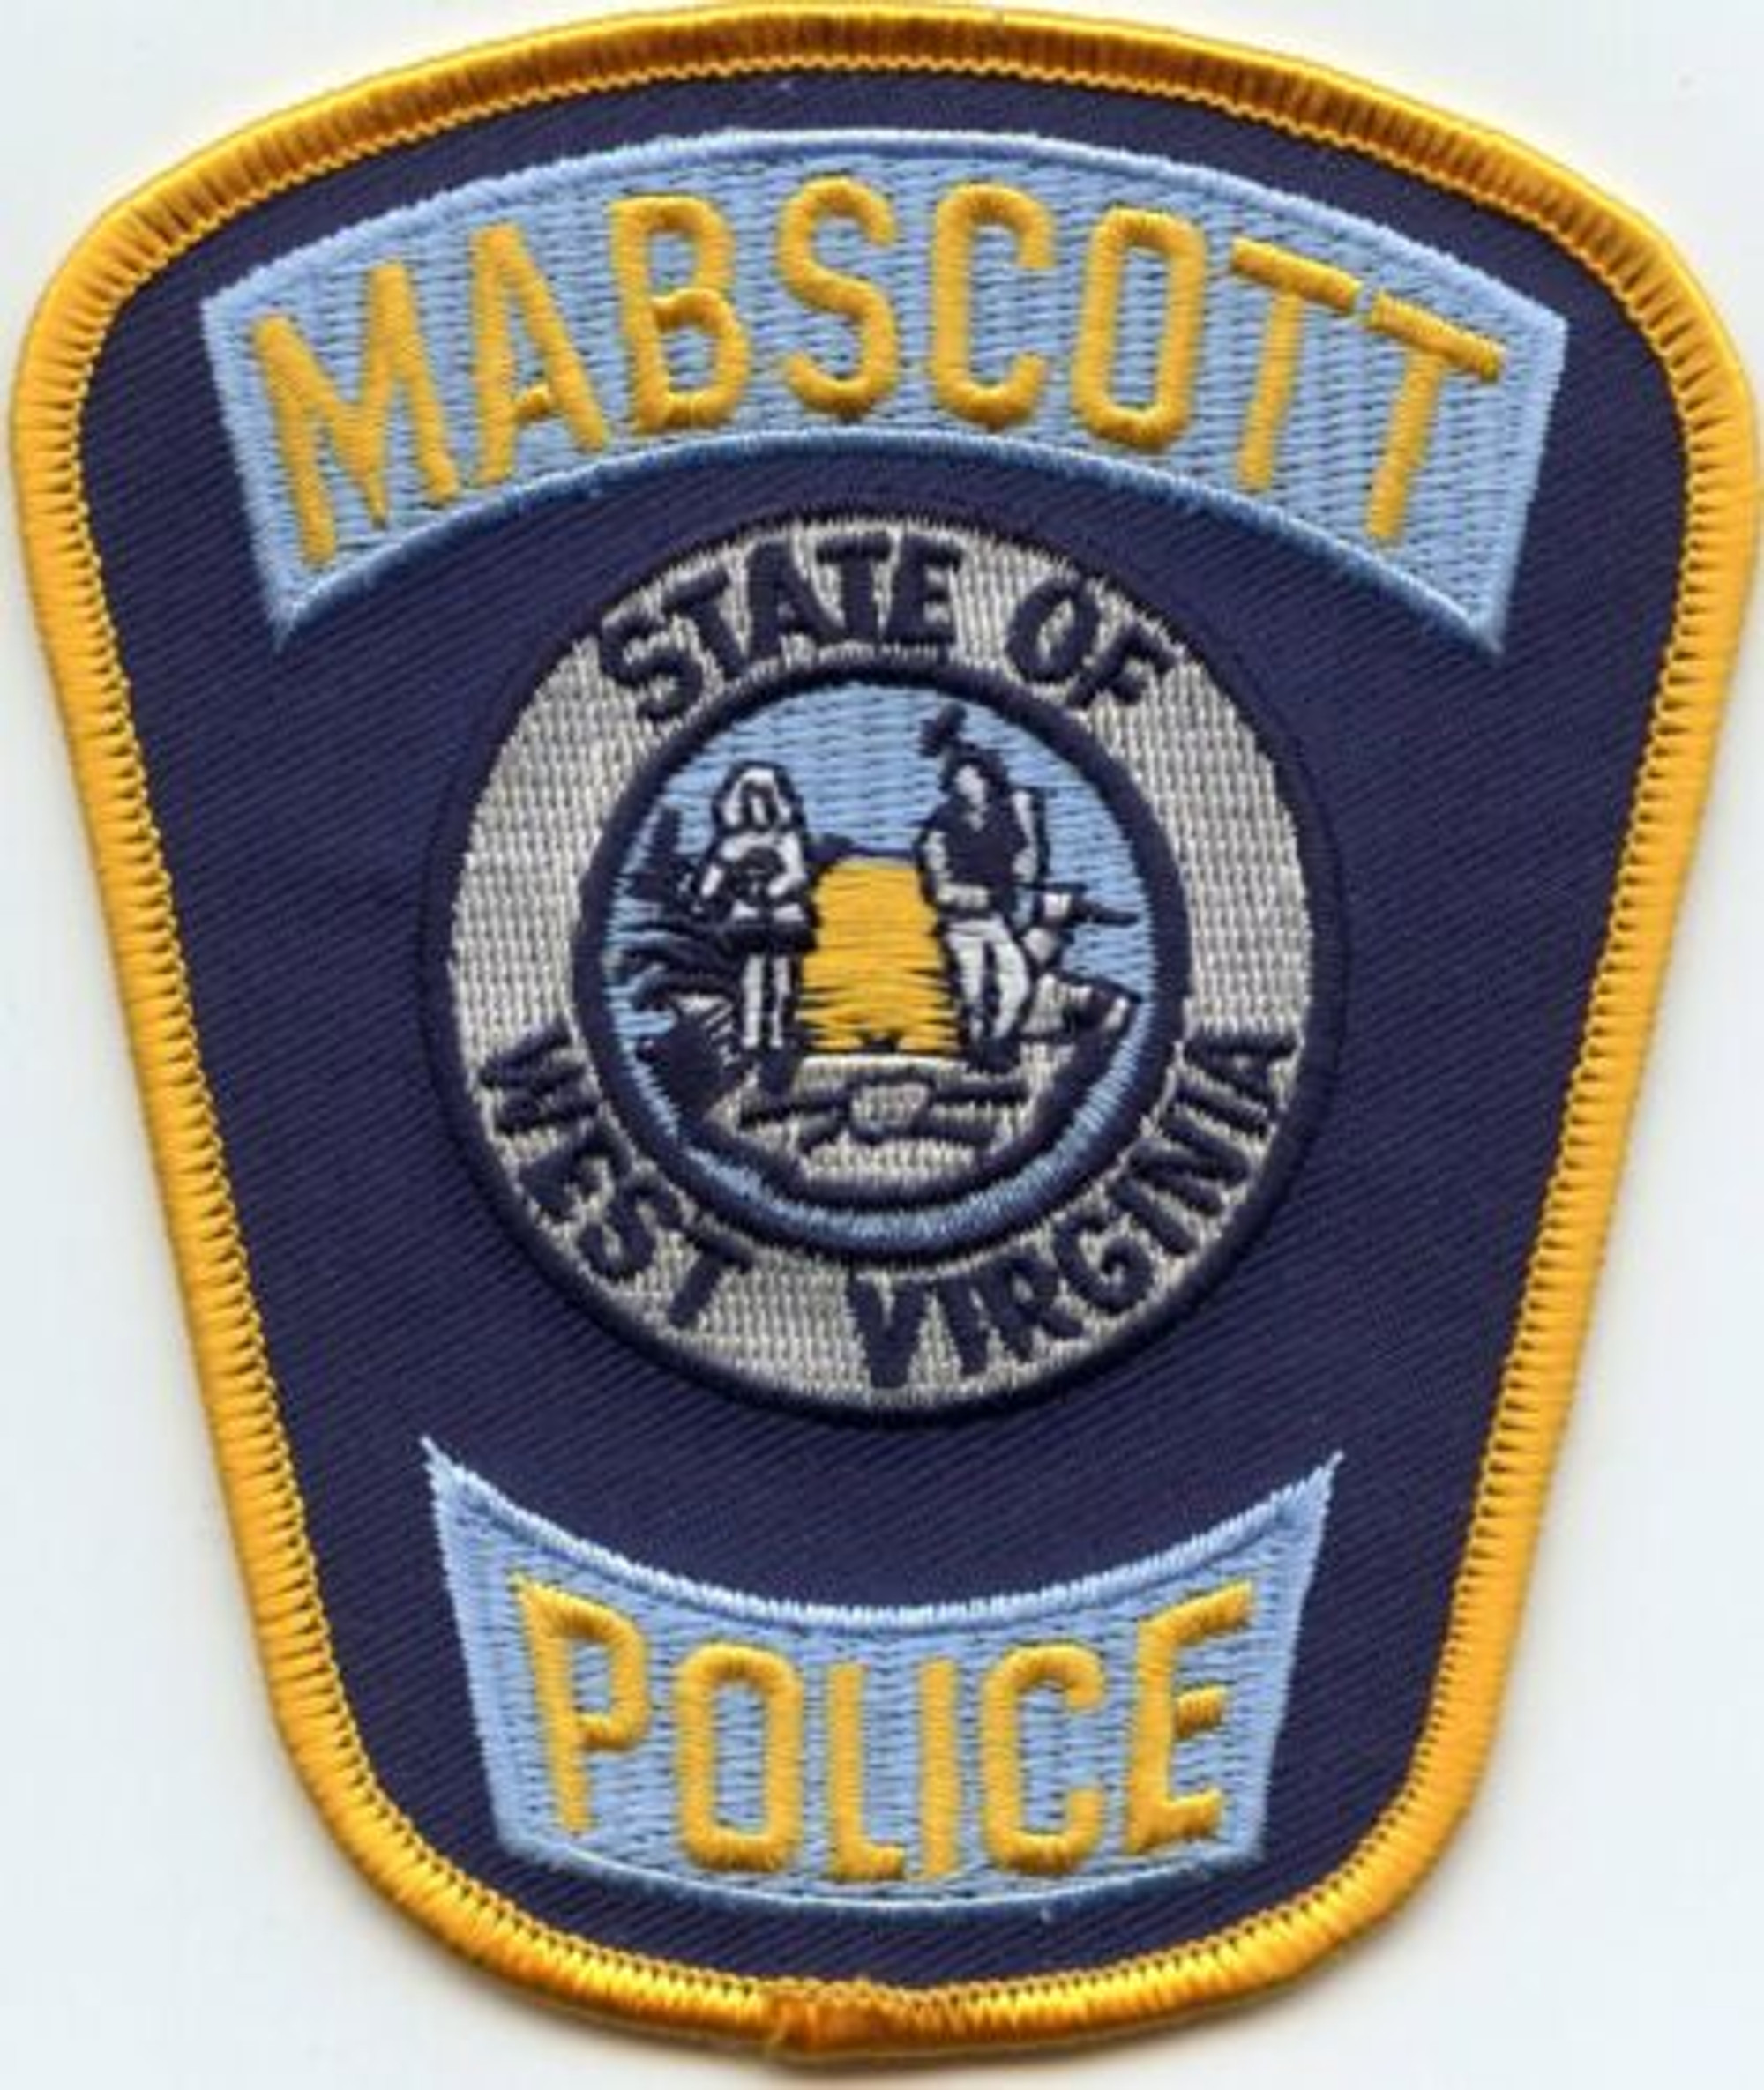 Mabscott WV Police Patch